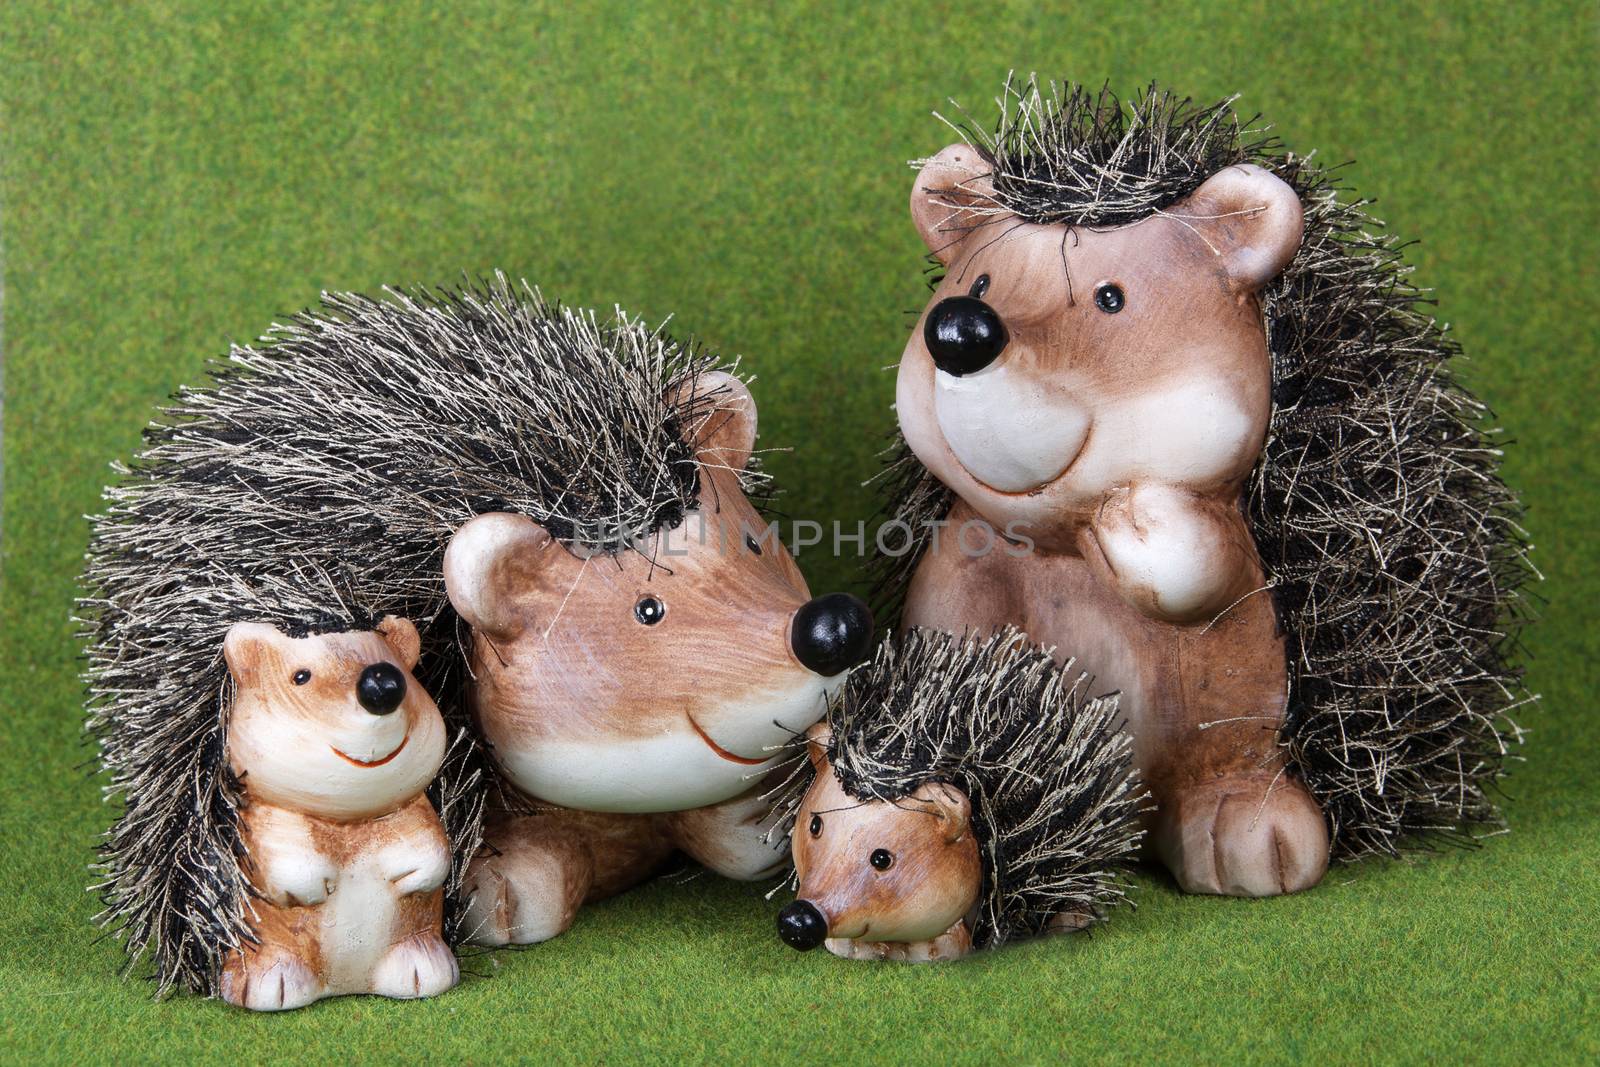 Family of cute toy Hedgehogs together on grass by VivacityImages